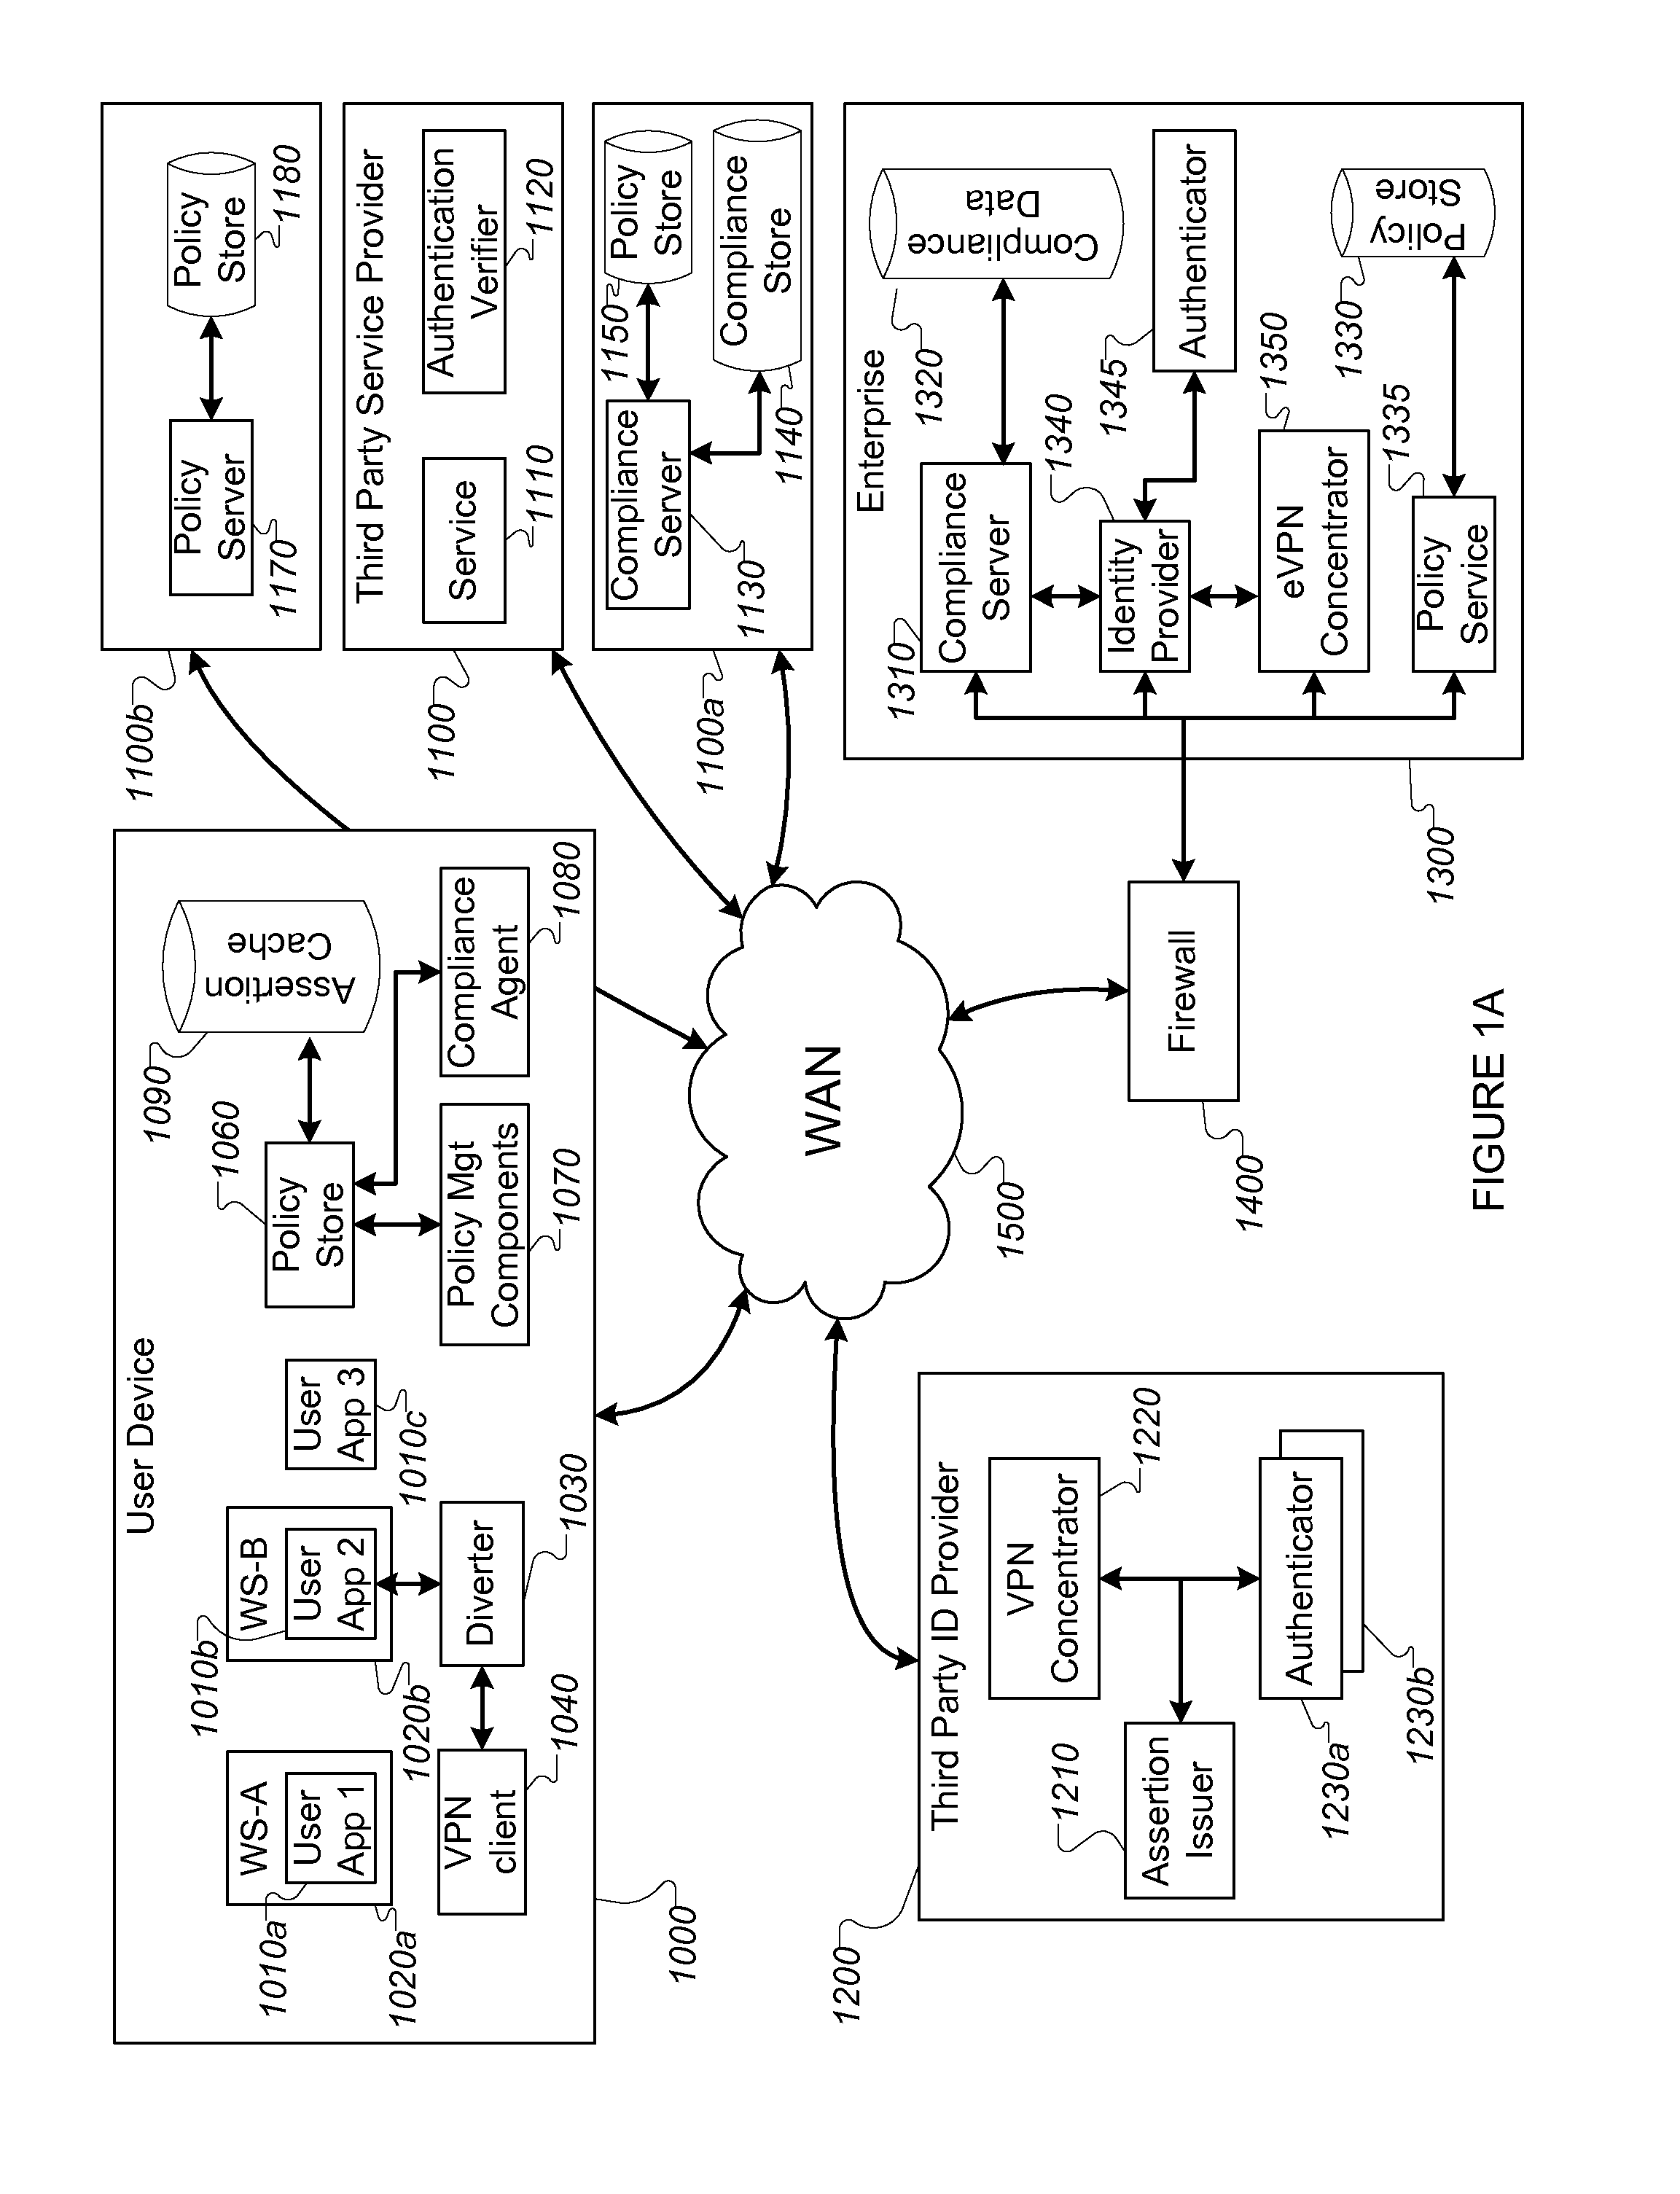 Method for authentication and assuring compliance of devices accessing external services